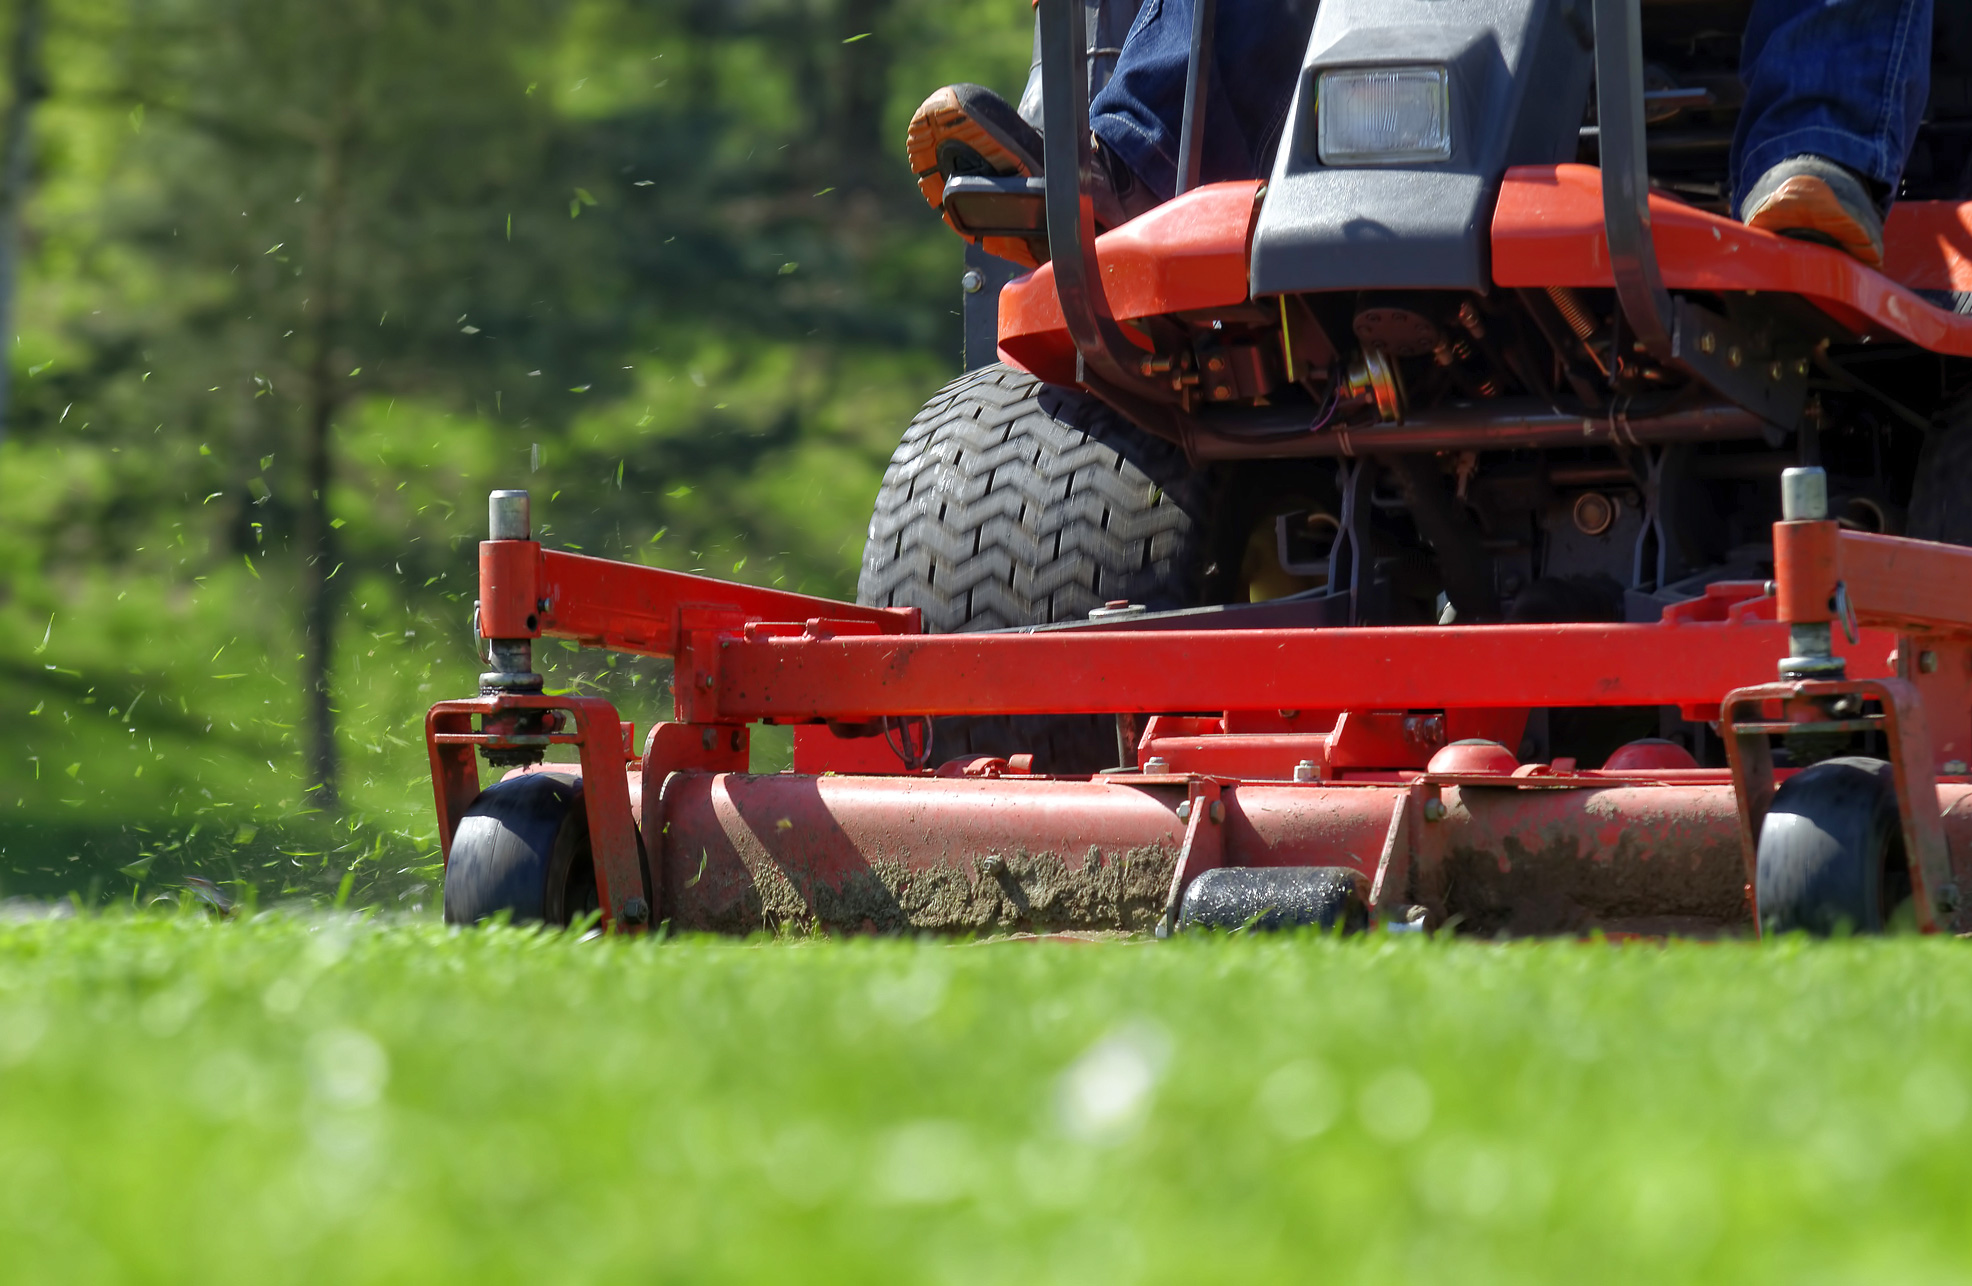 Read more about the article Safety Behavior and Work Safety Climate among Landscapers and Grounds Keeping Workers in North Carolina: A Pilot Study